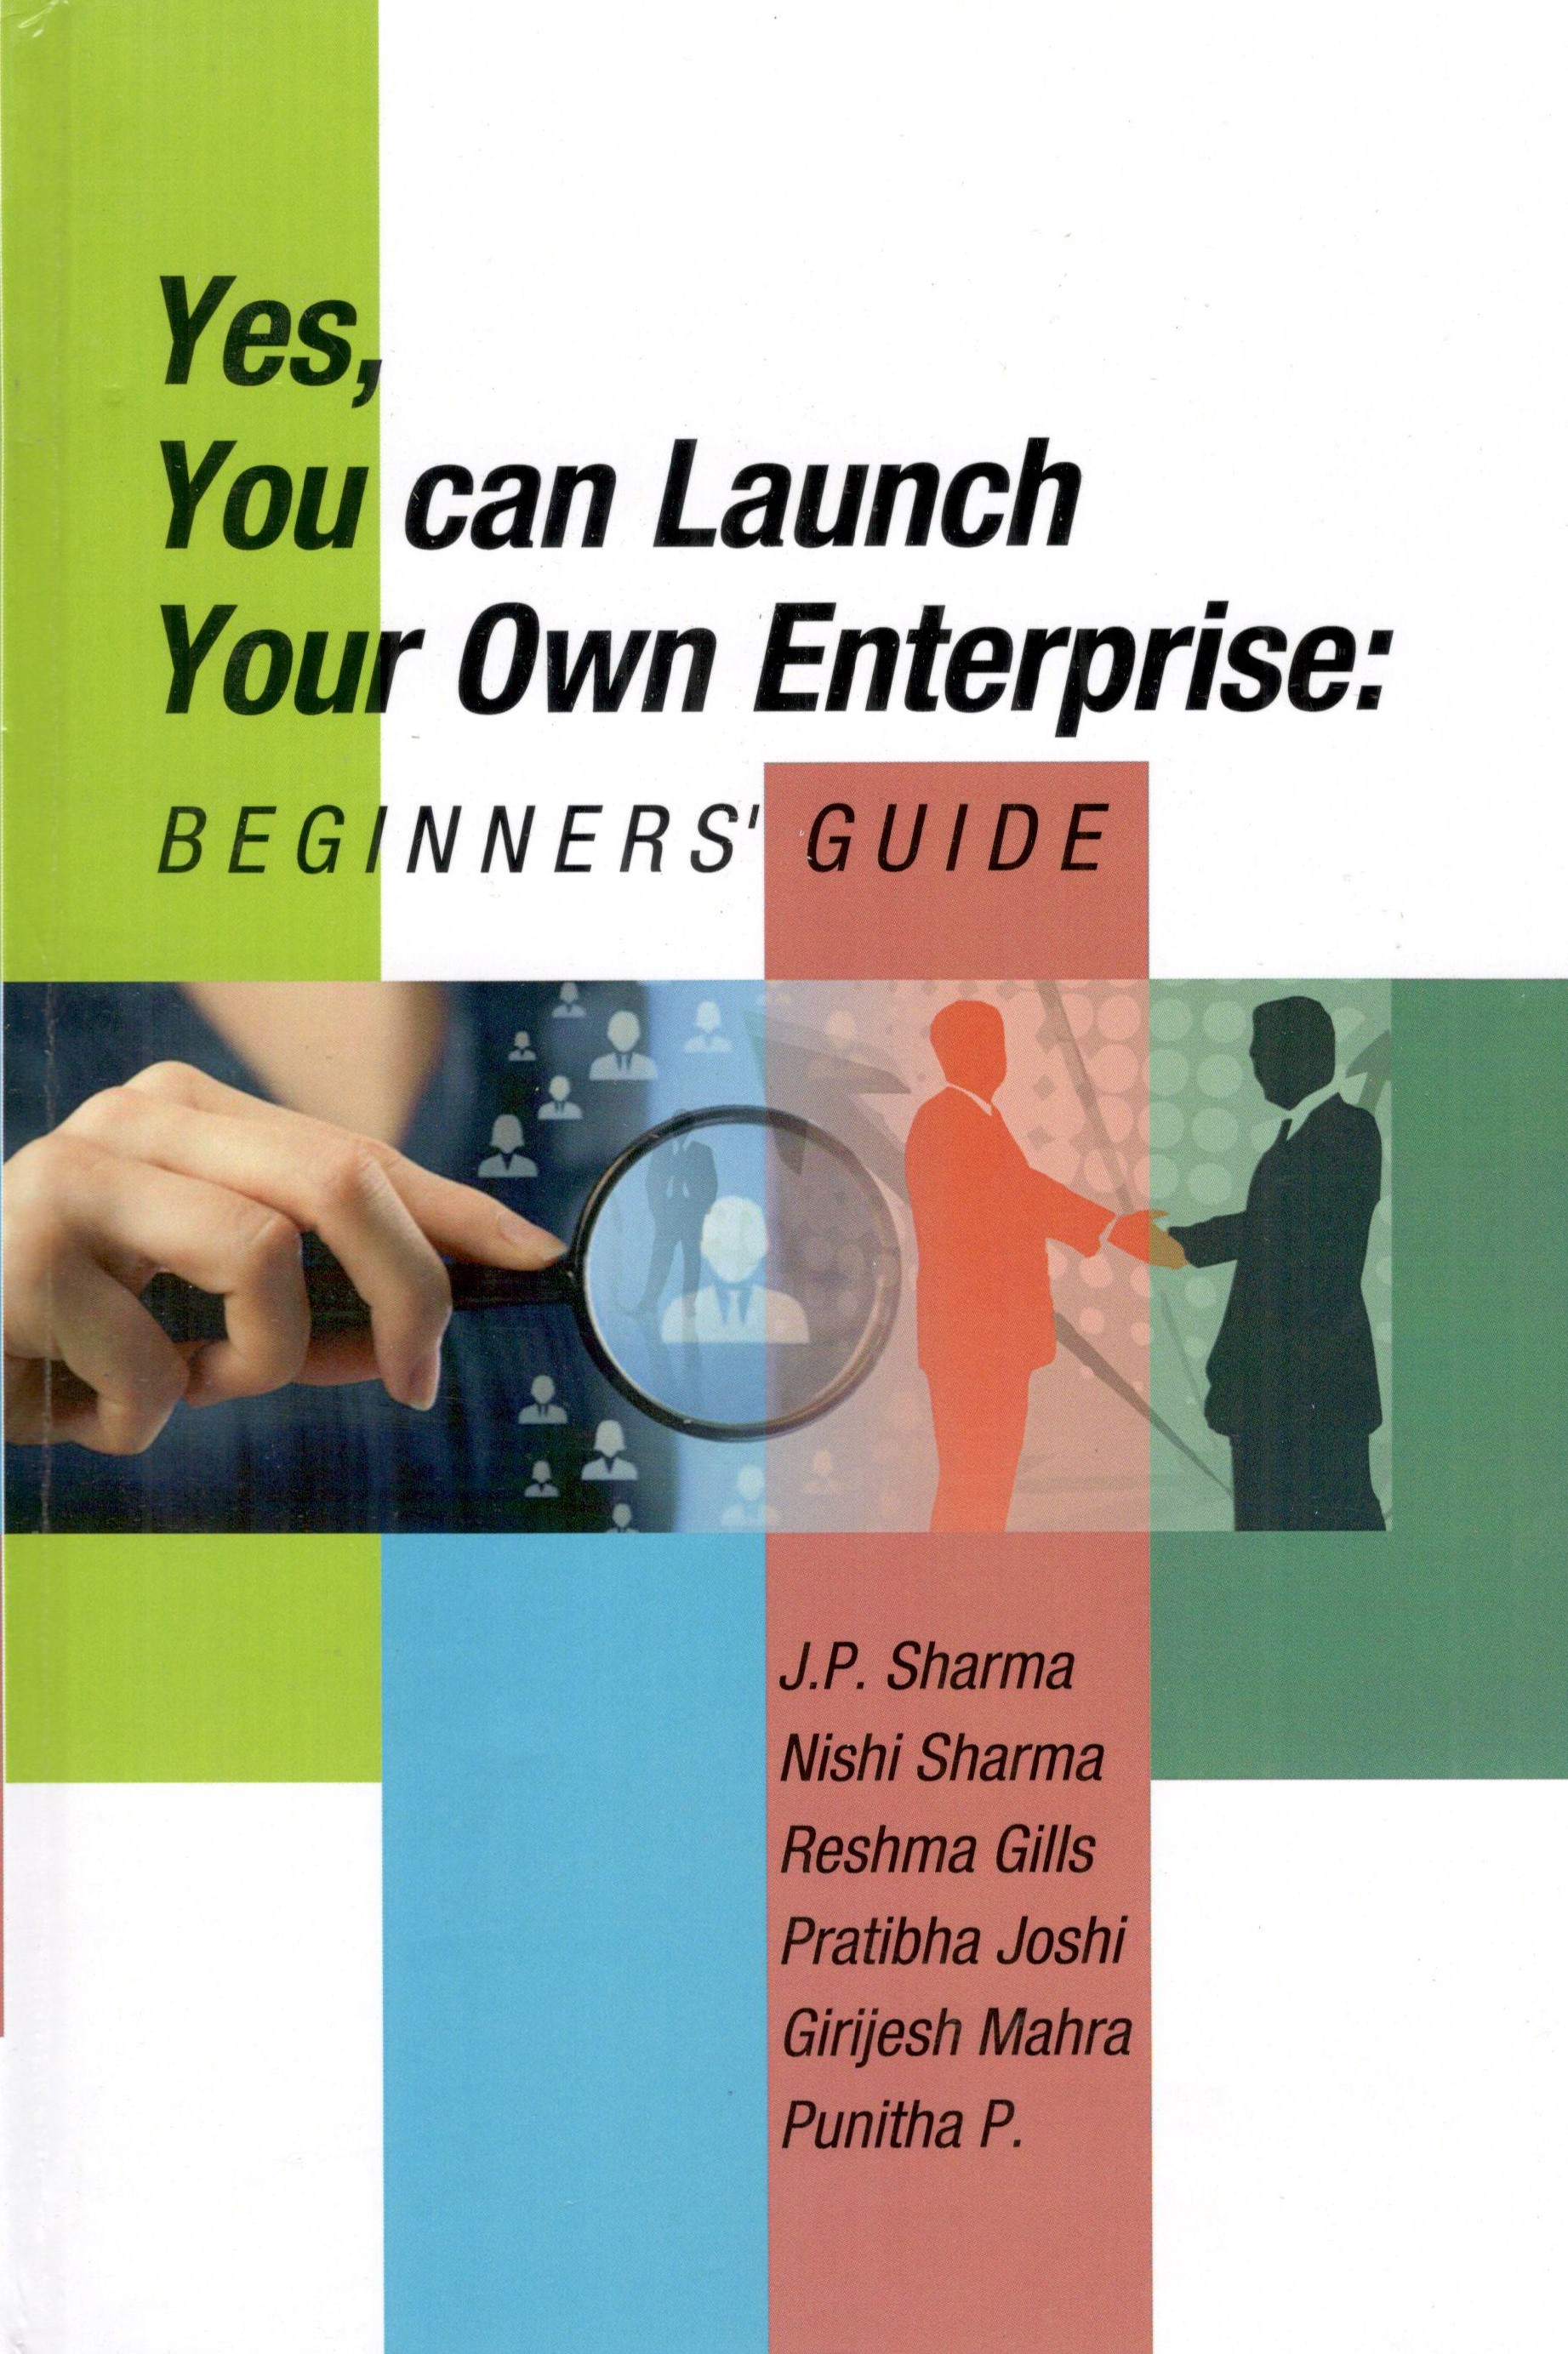 Yes, You can Launch Your Own Enterprise: Beginners' Guide